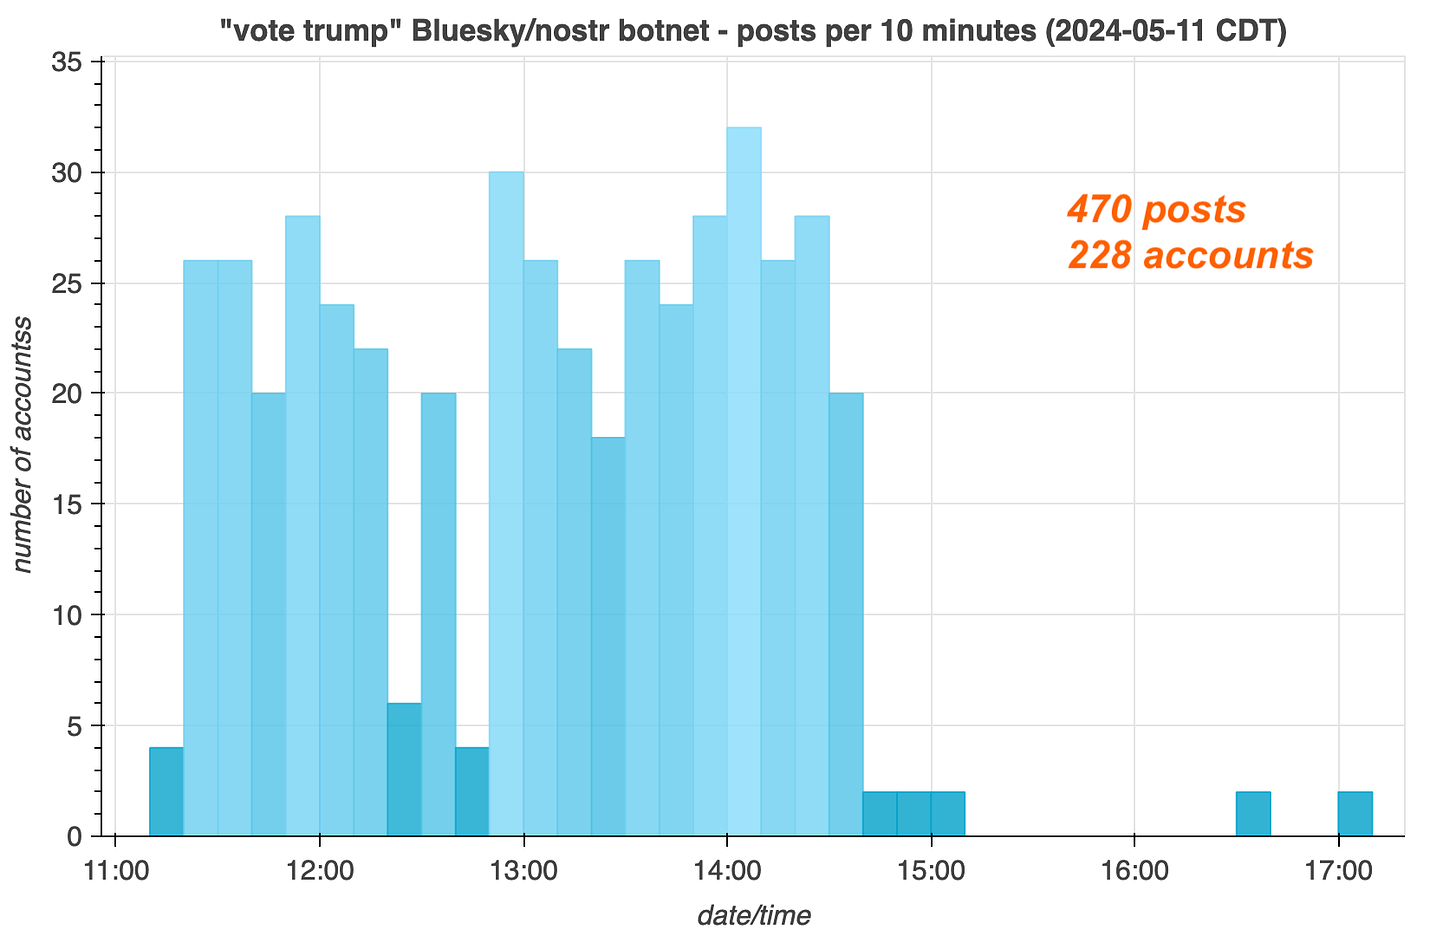 hourly post volume for the spam accounts, showing 470 posts from 228 accounts in roughly 6 hours on May 11th 2024